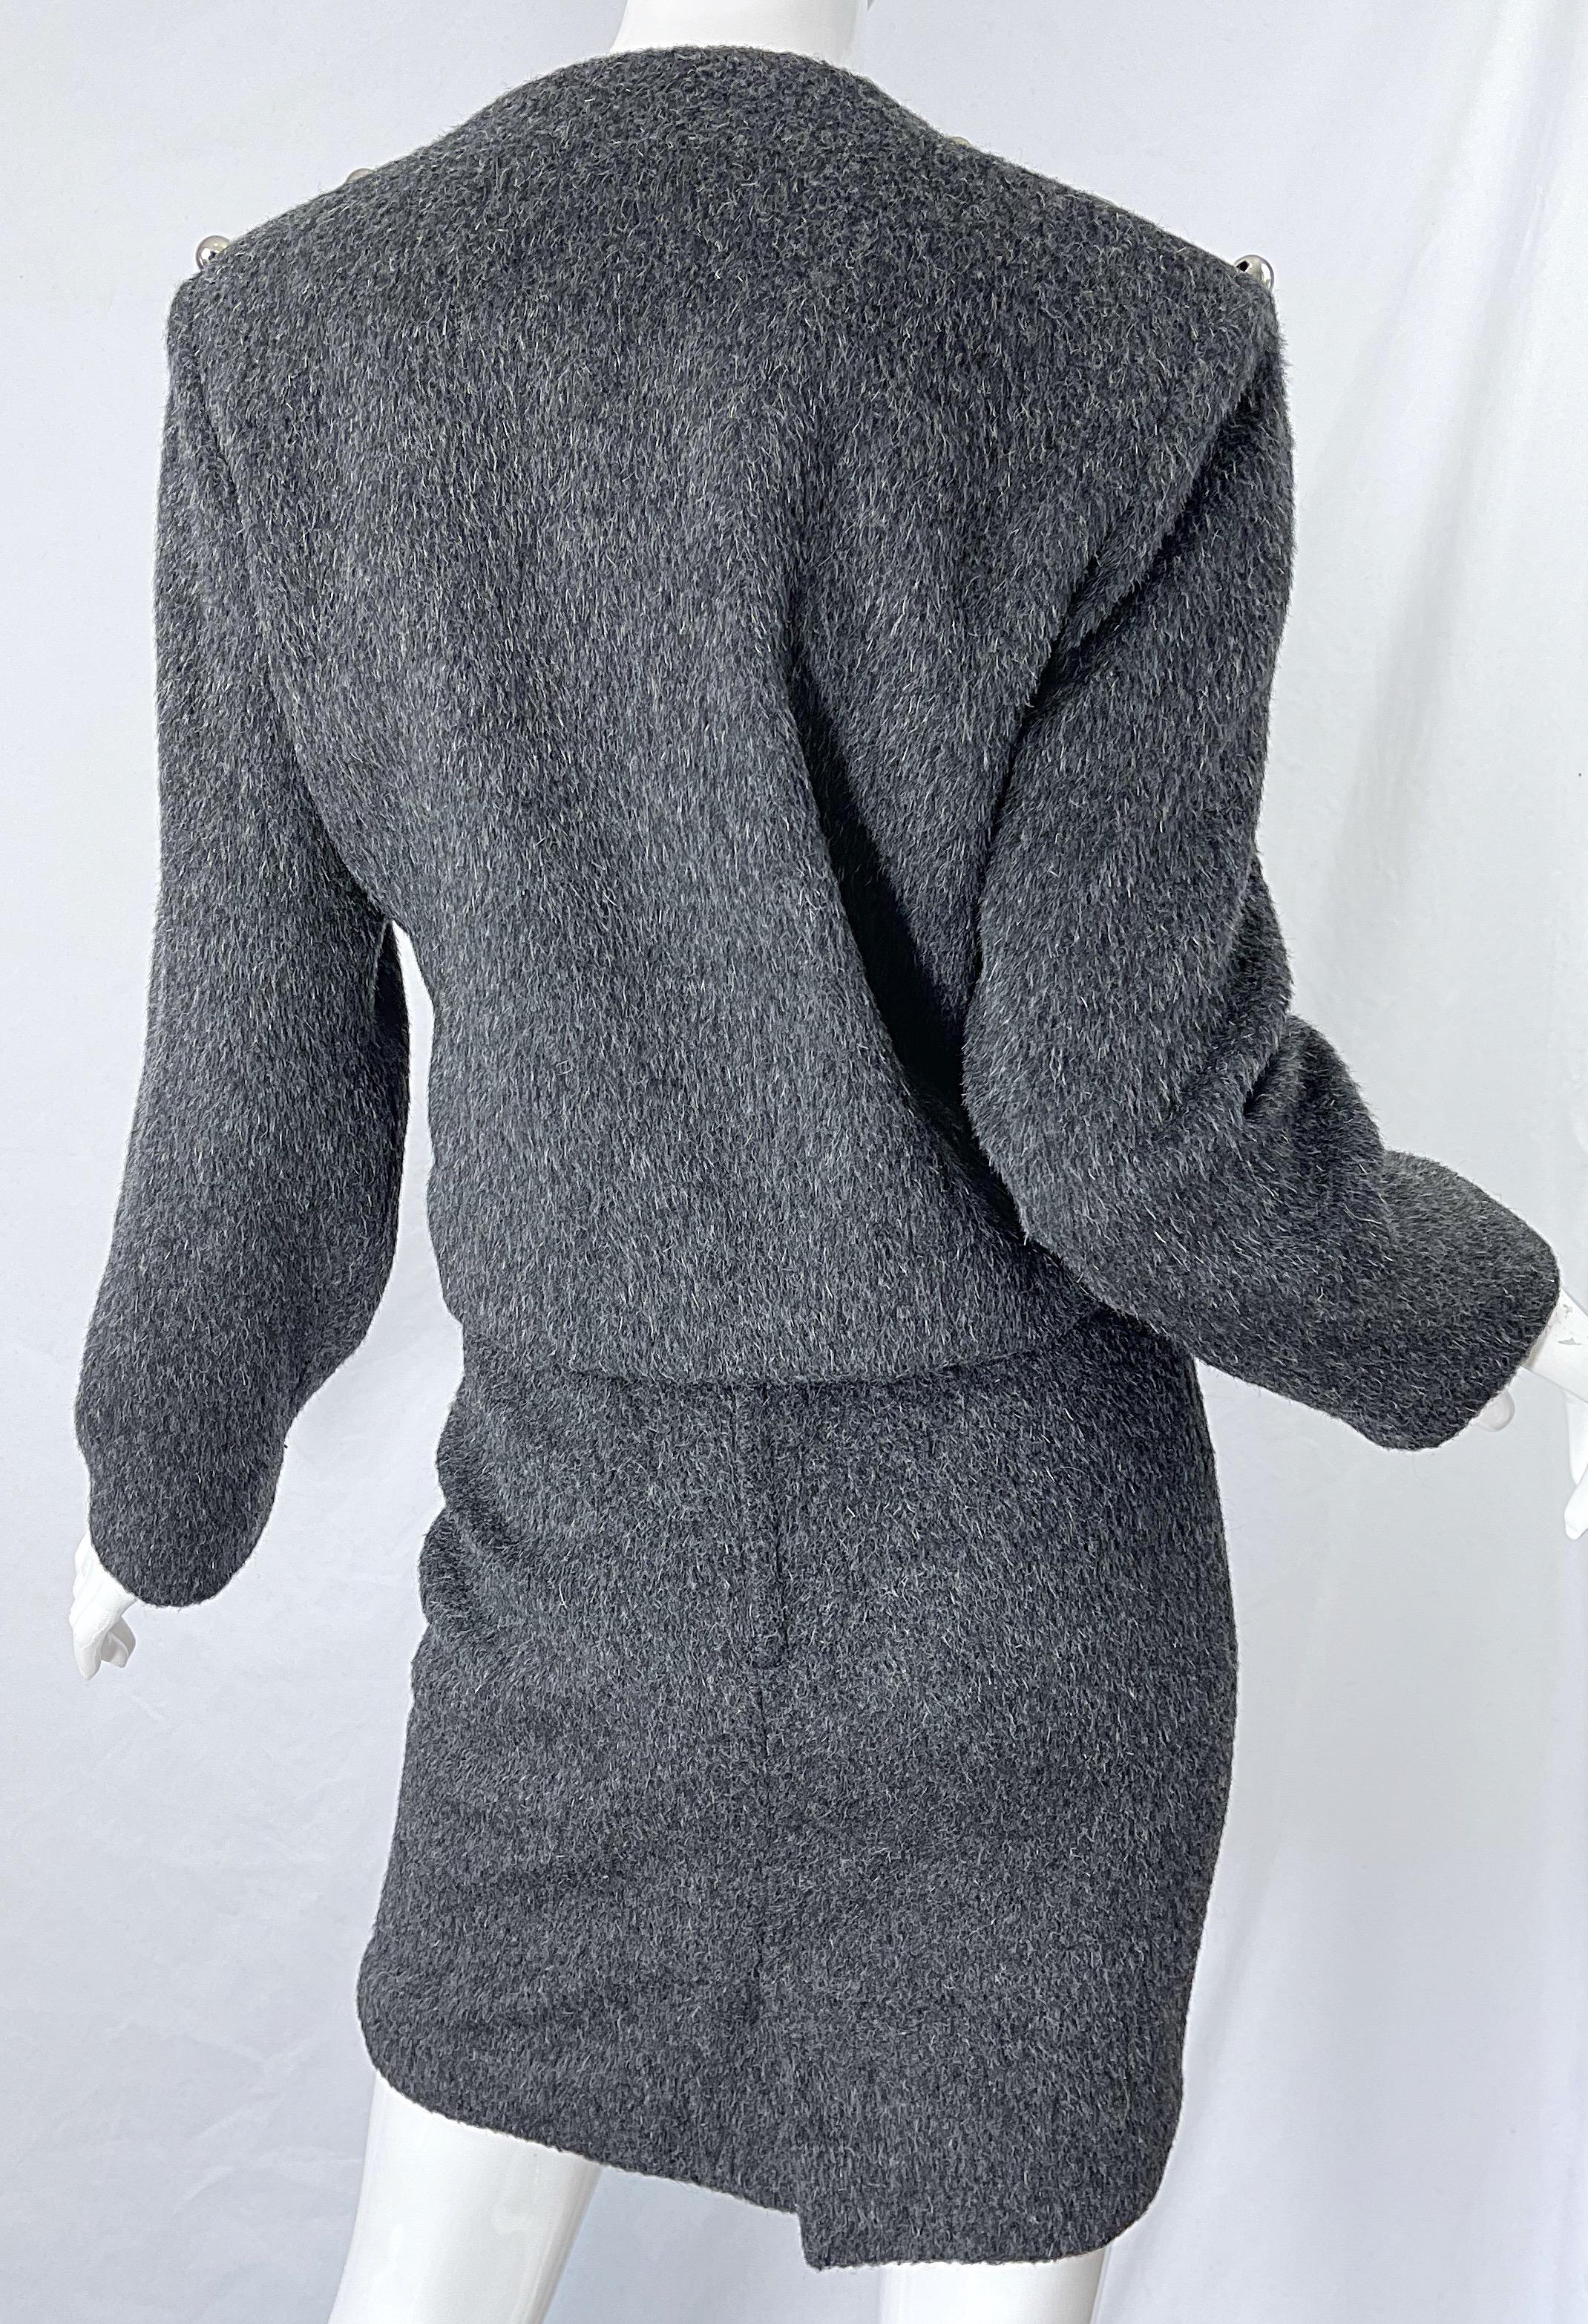 Patrick Kelly 1980s Charcoal Grey Silver Studded Balls Vintage 80s Skirt Suit For Sale 5